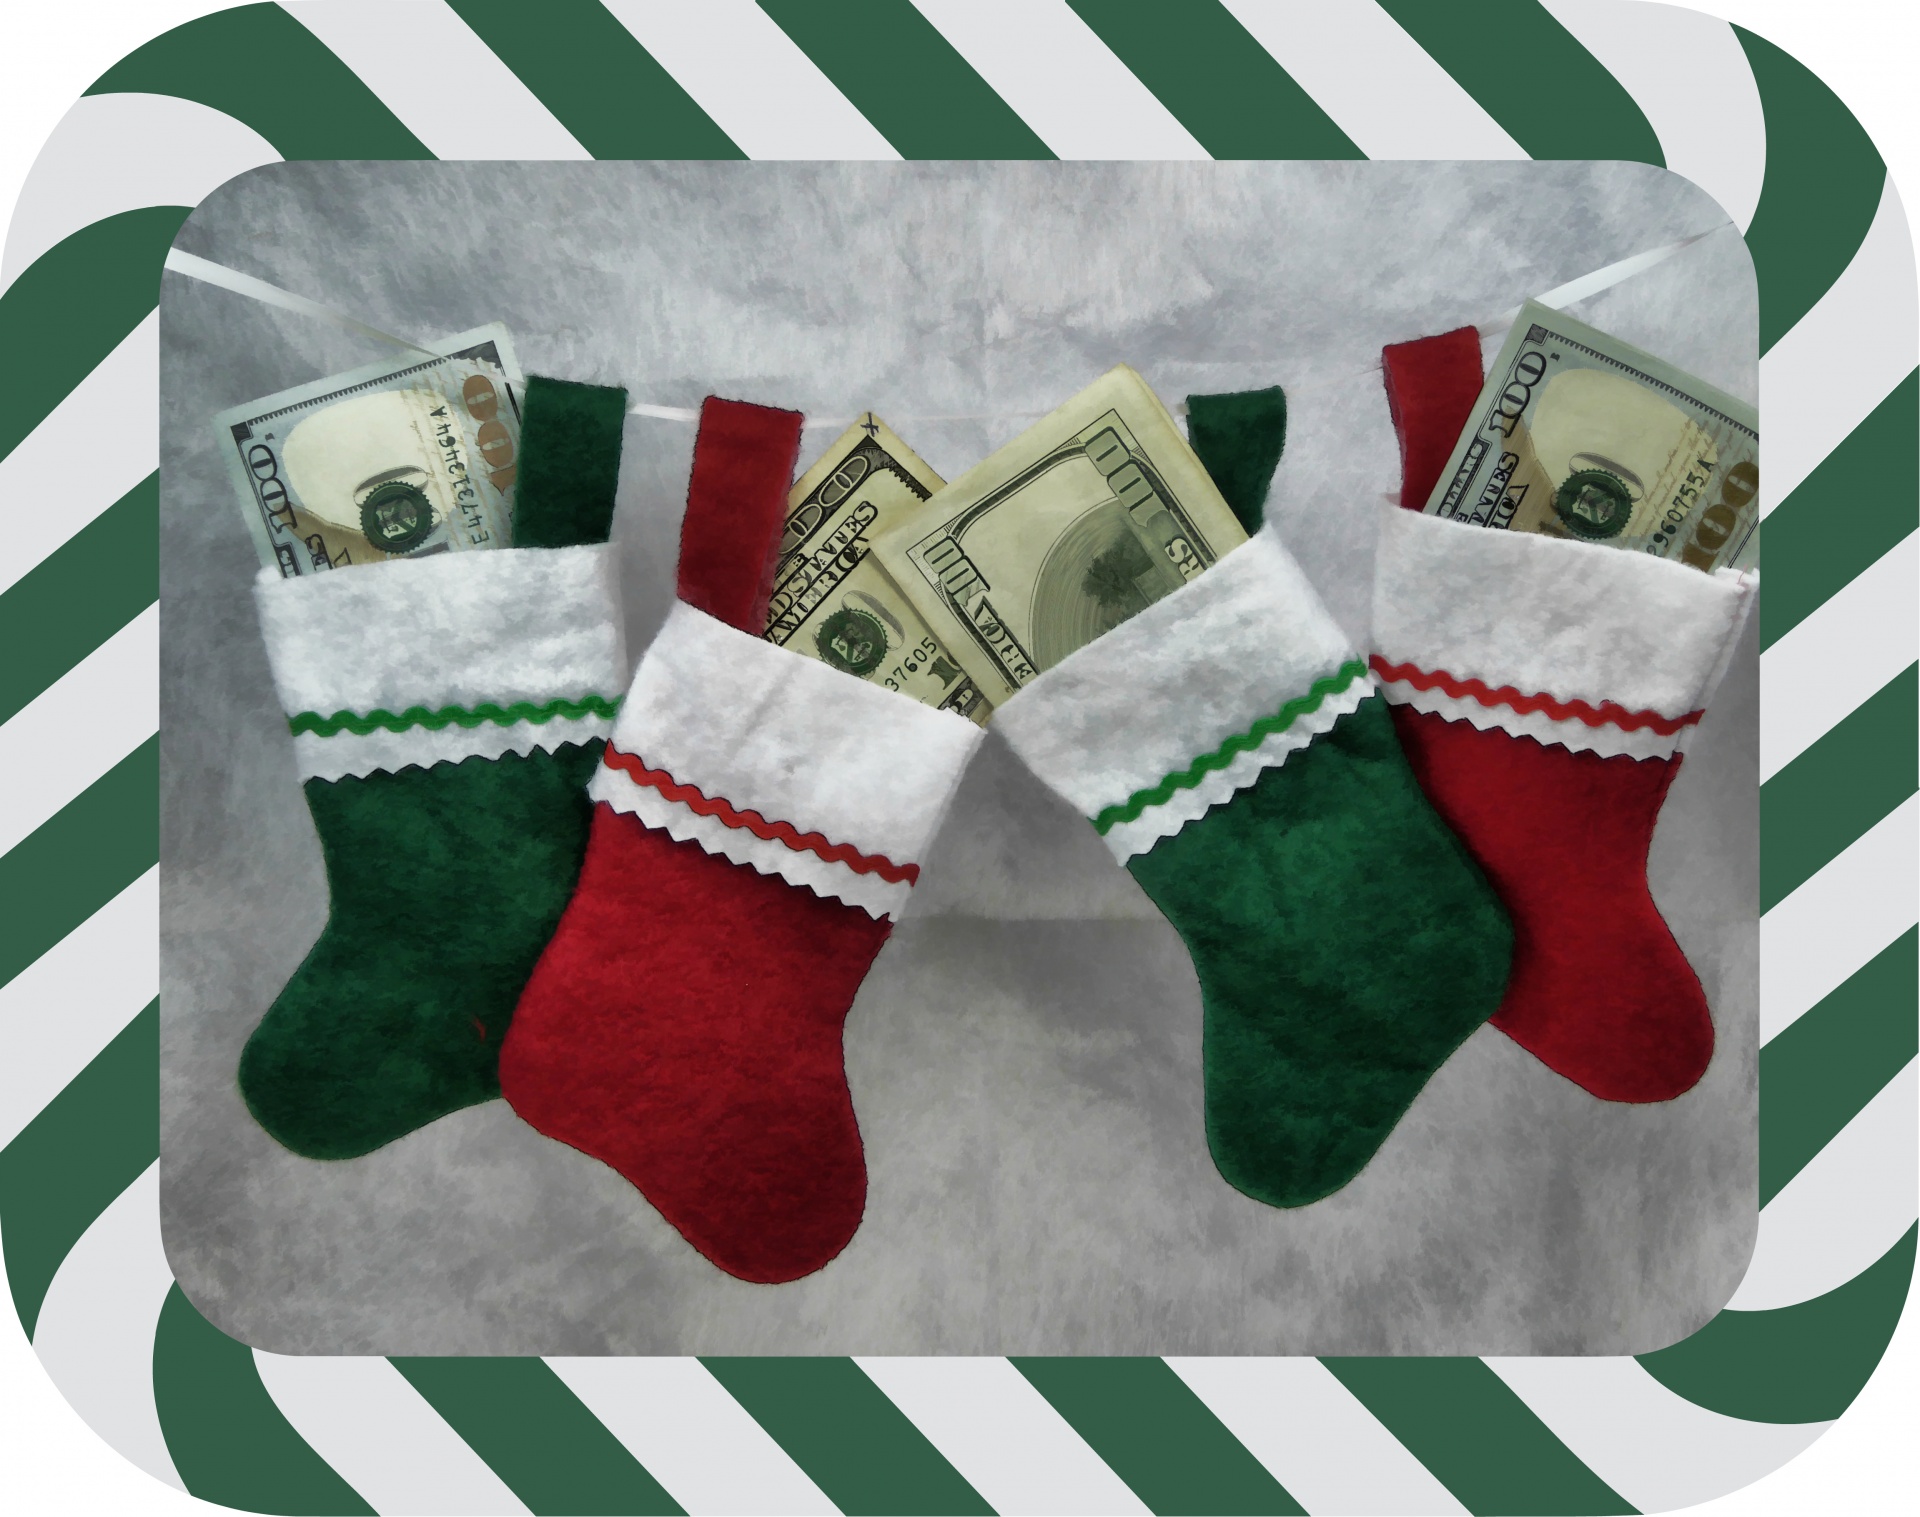 Small Christmas socks with a one hundred dollar bills in each one